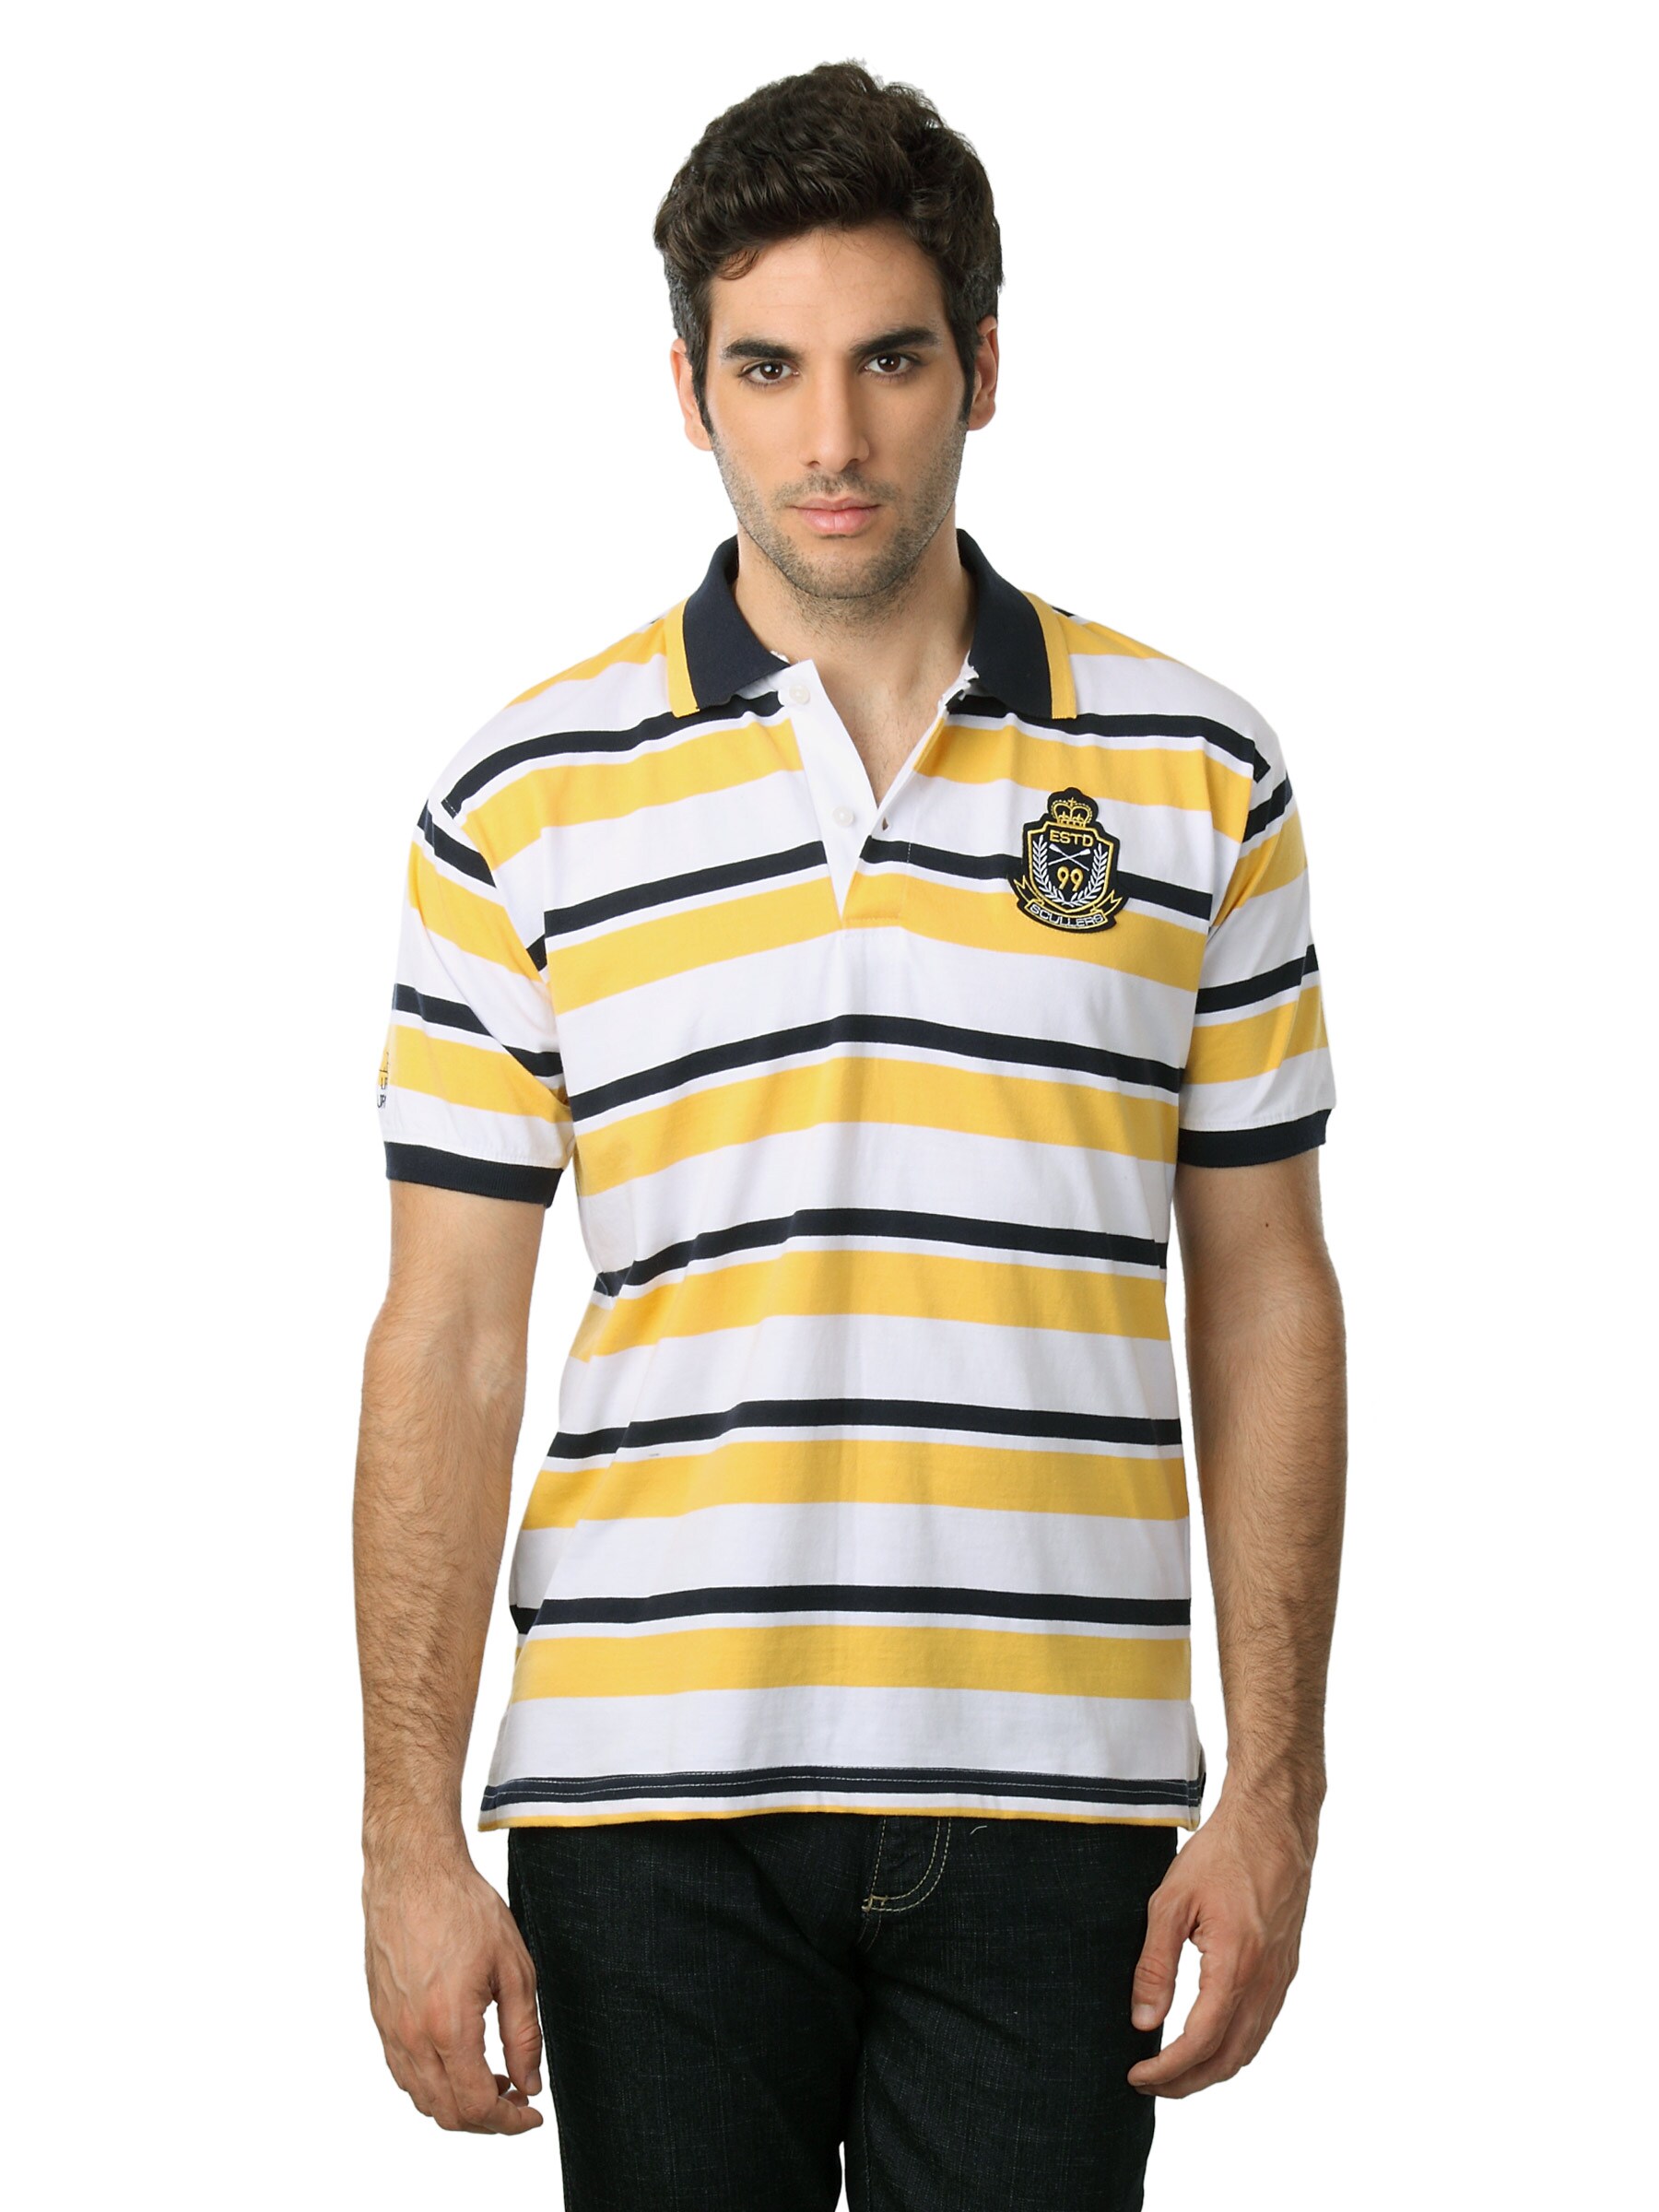 Scullers Men Yellow & Navy Blue Striped T-shirt